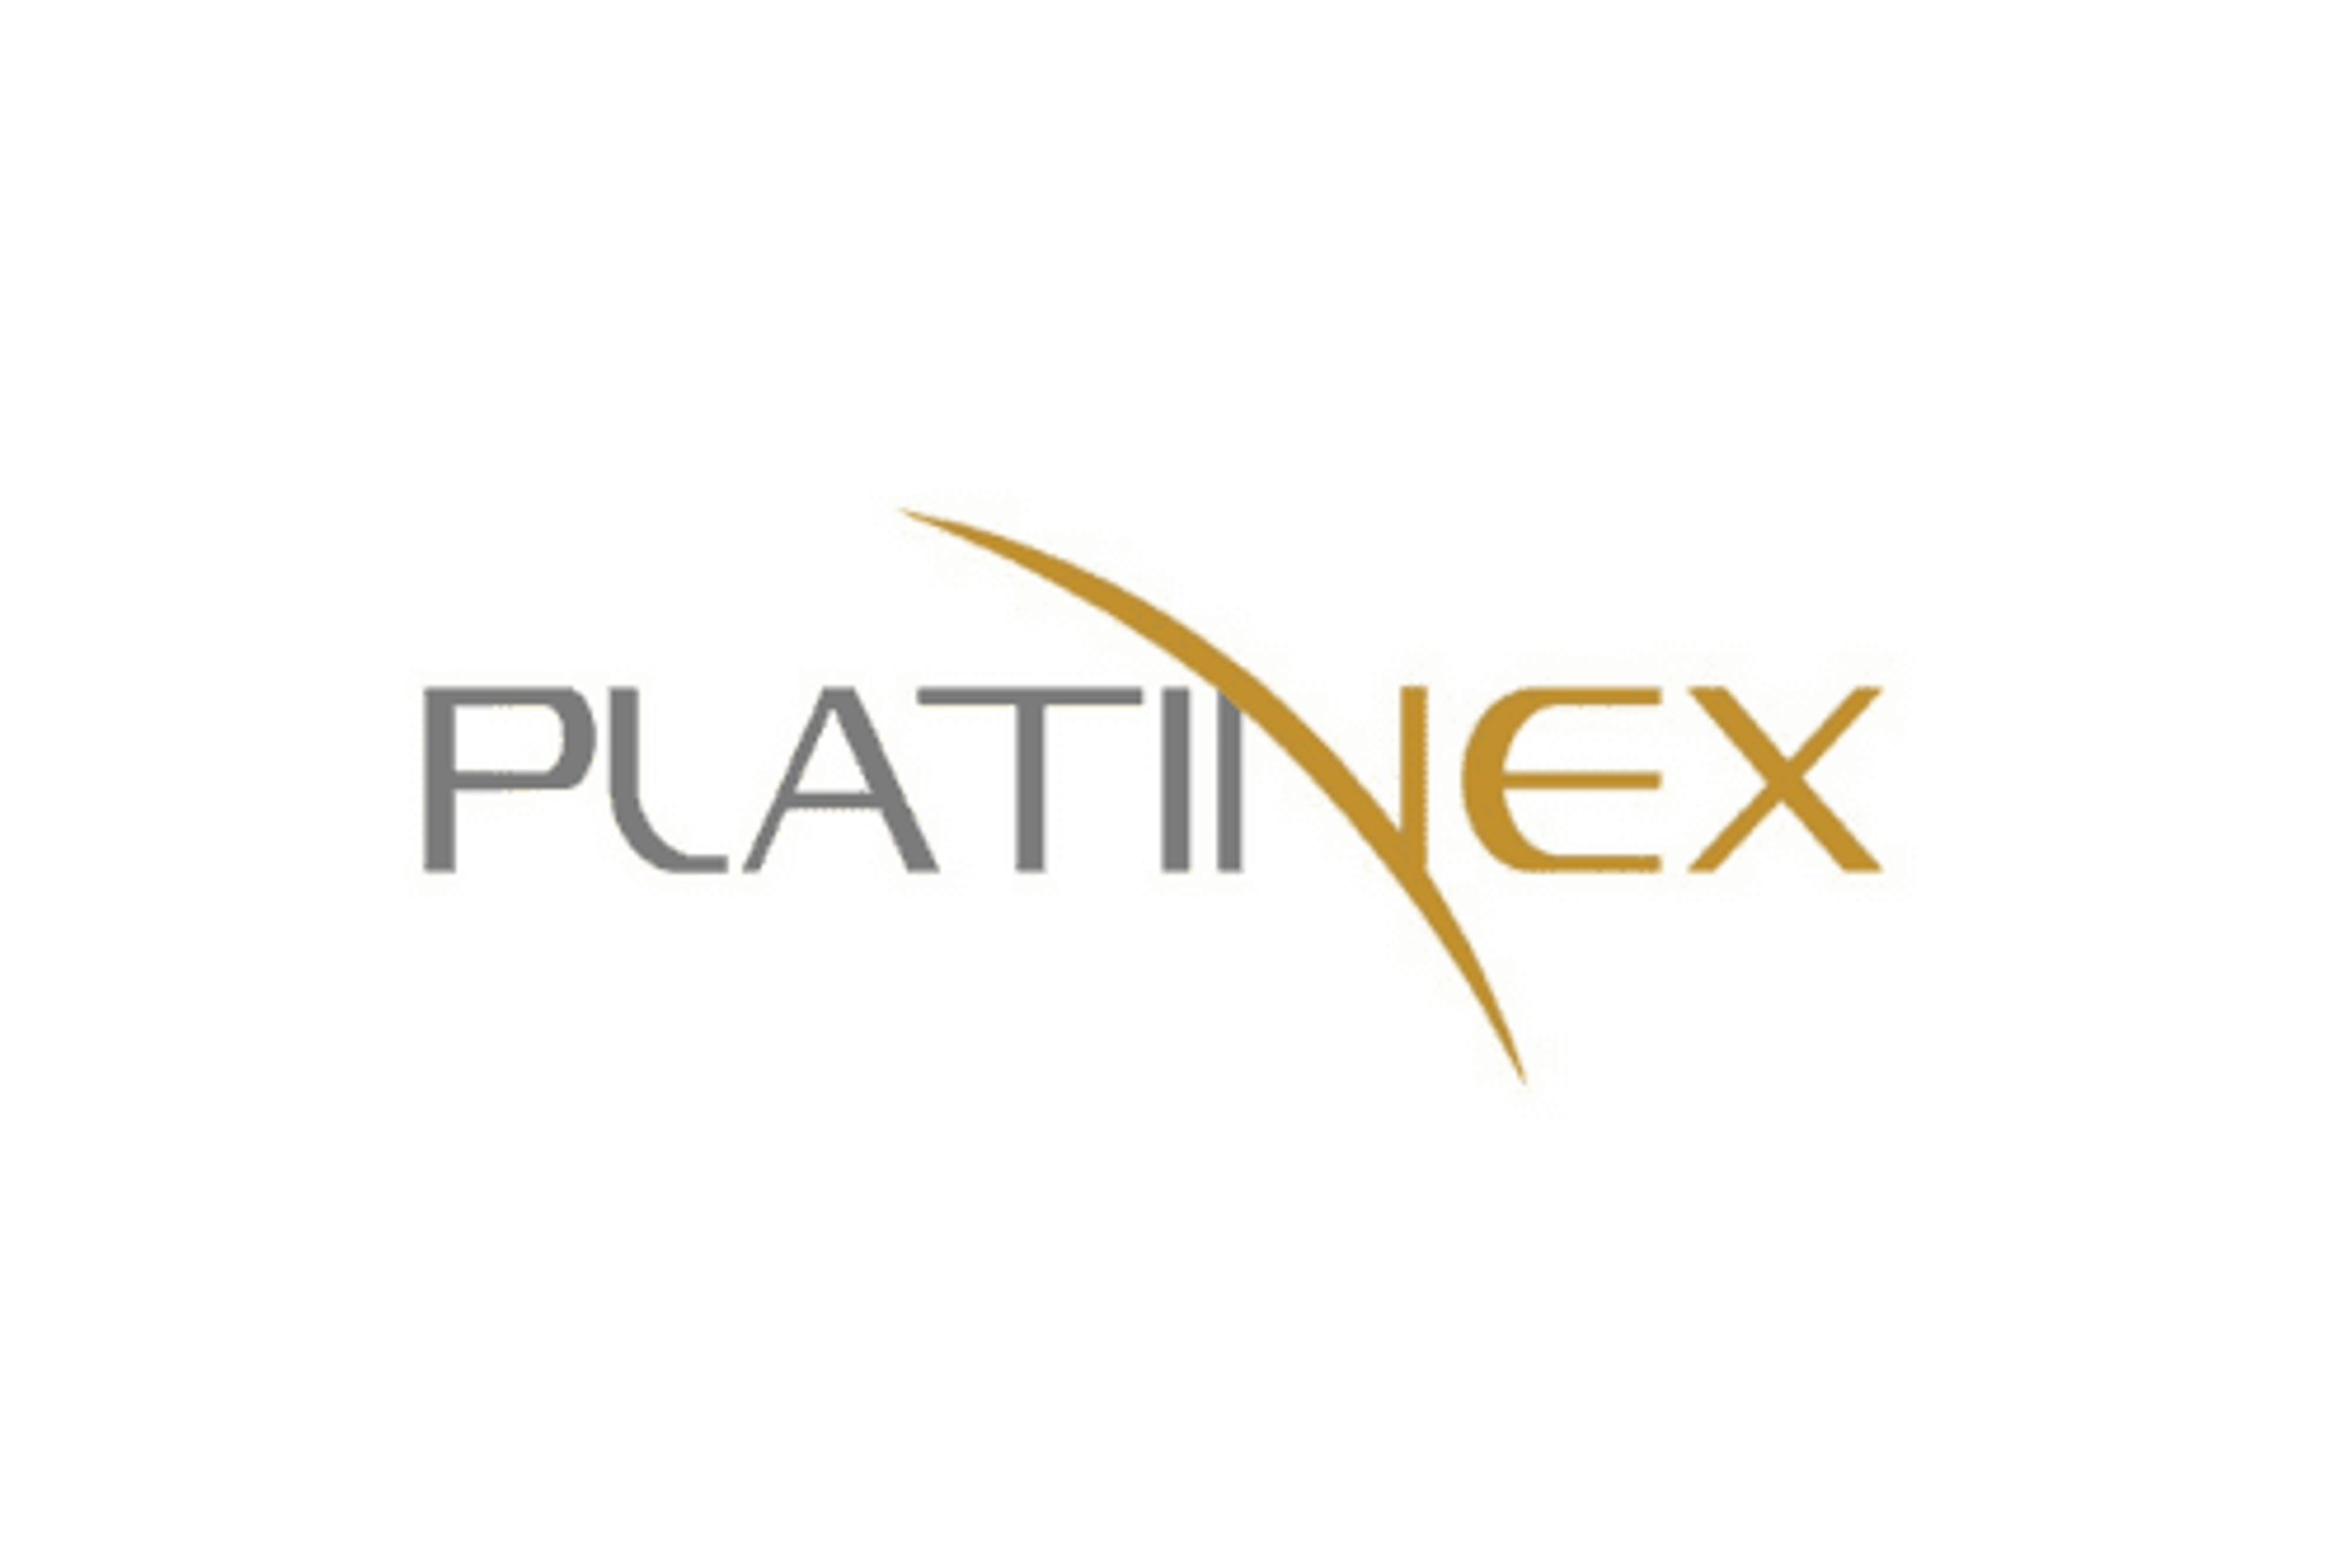 Platinex Announces Expansion of W2 Copper-Nickel-PGE Project